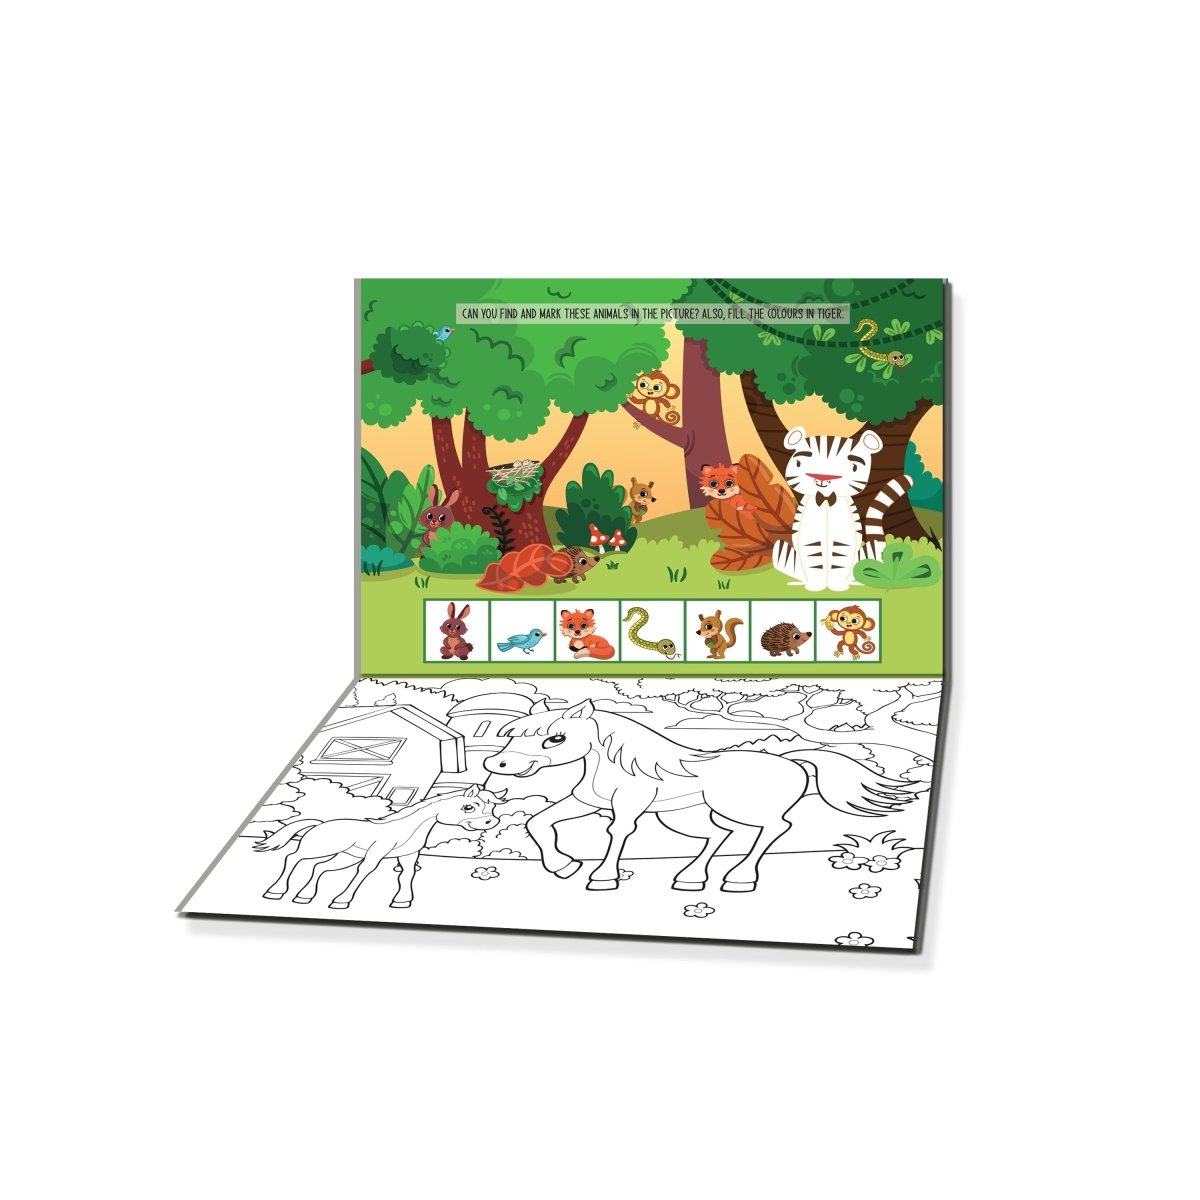 Dreamland Publications Fun with Animals Activity & Coloring - 9789394767881